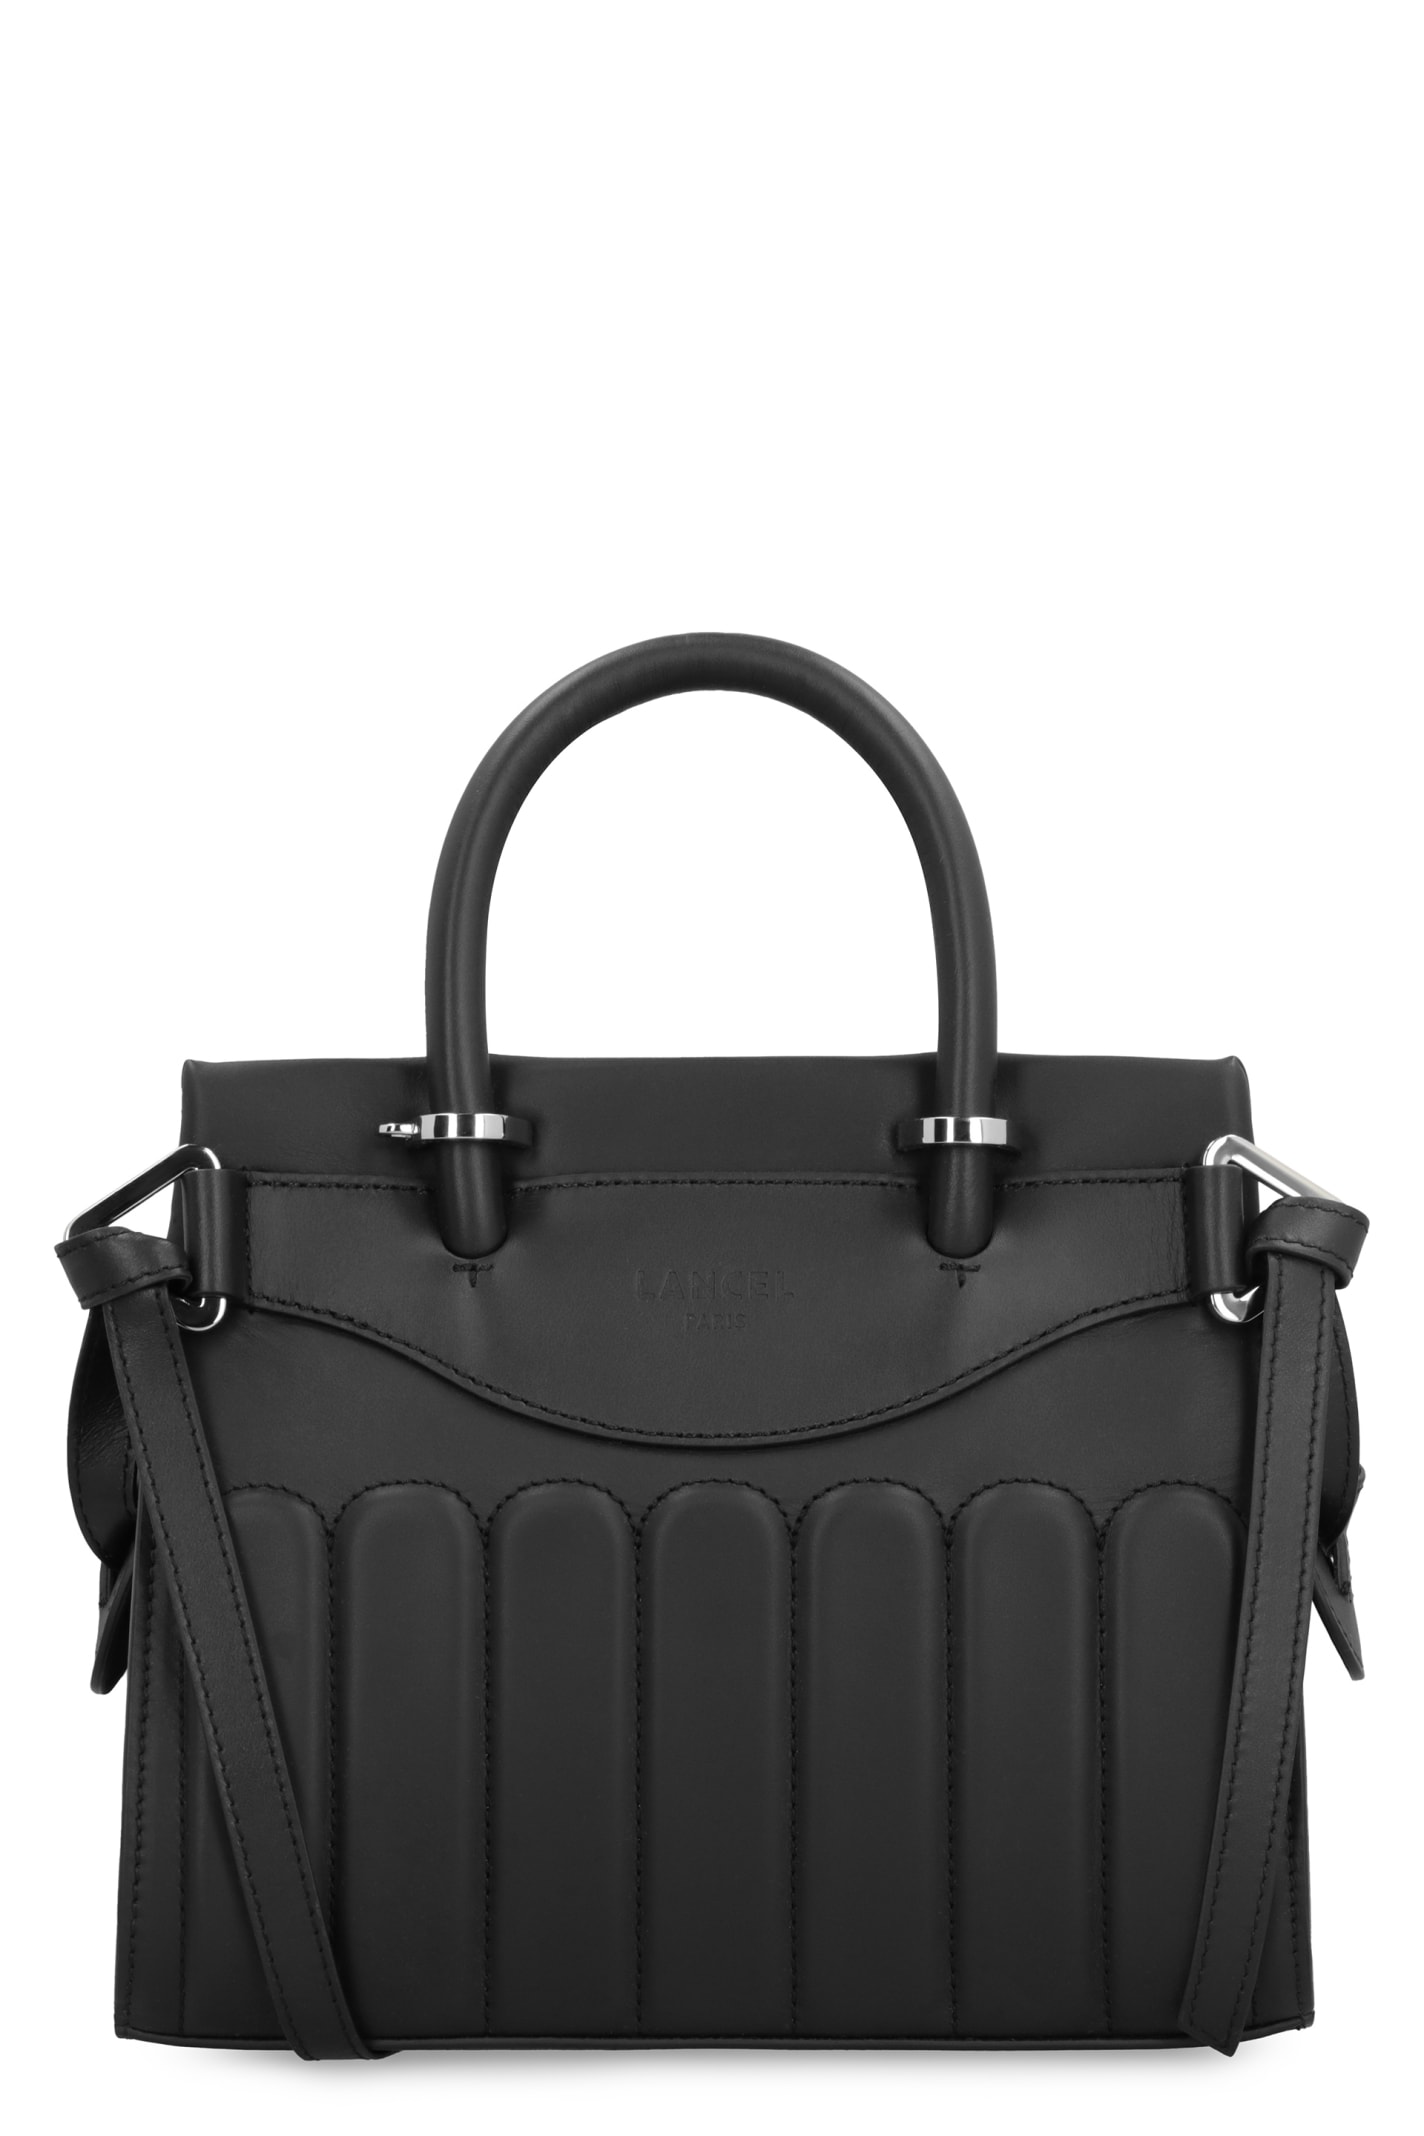 Lancel Rodeo Leather Tote